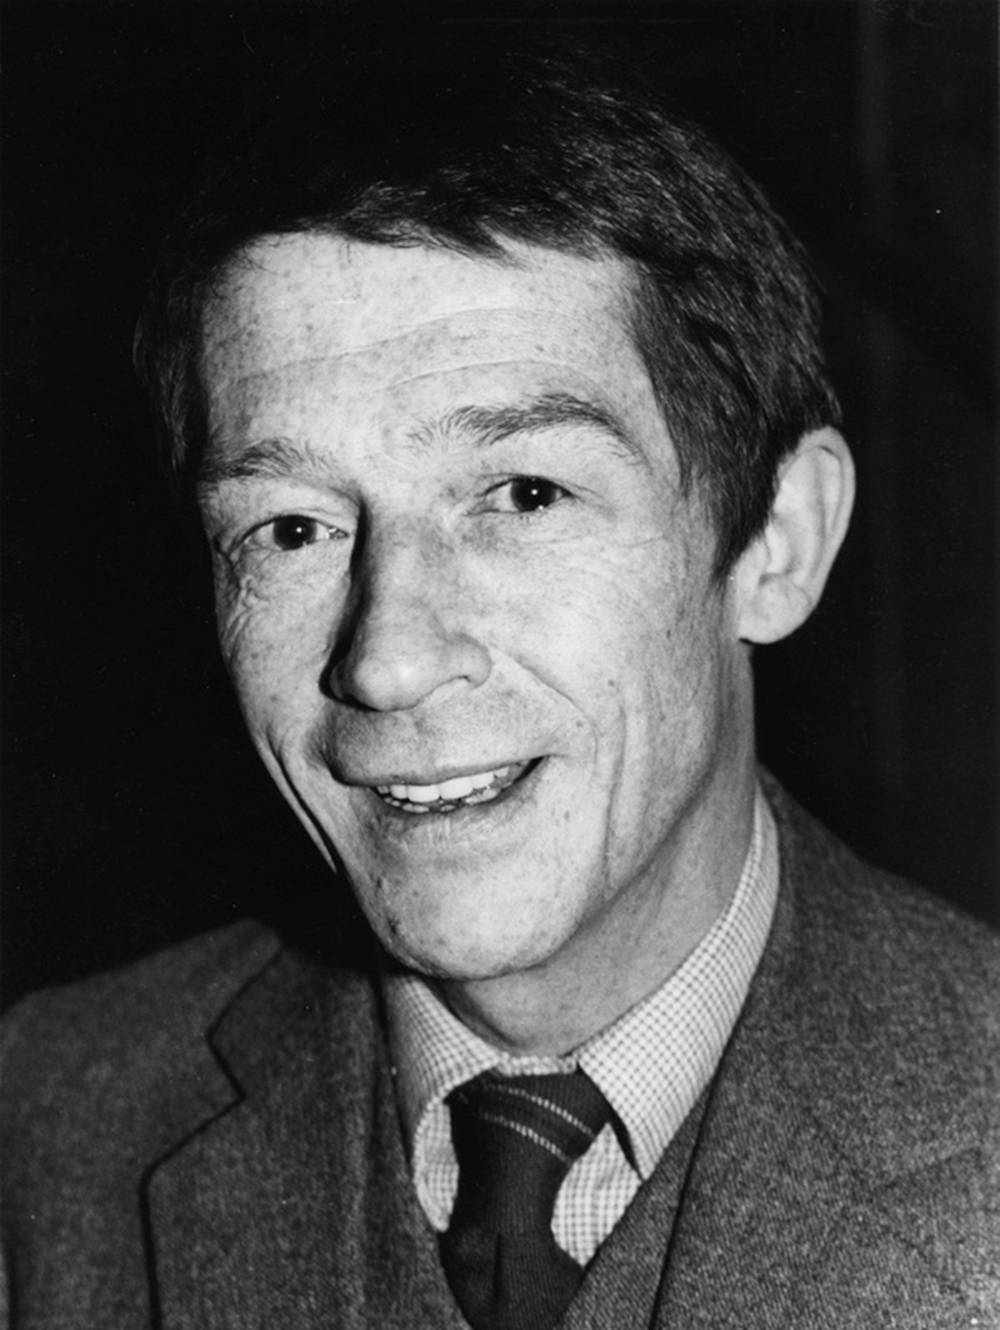 John Hurt Young Black And White In Suit Wallpaper